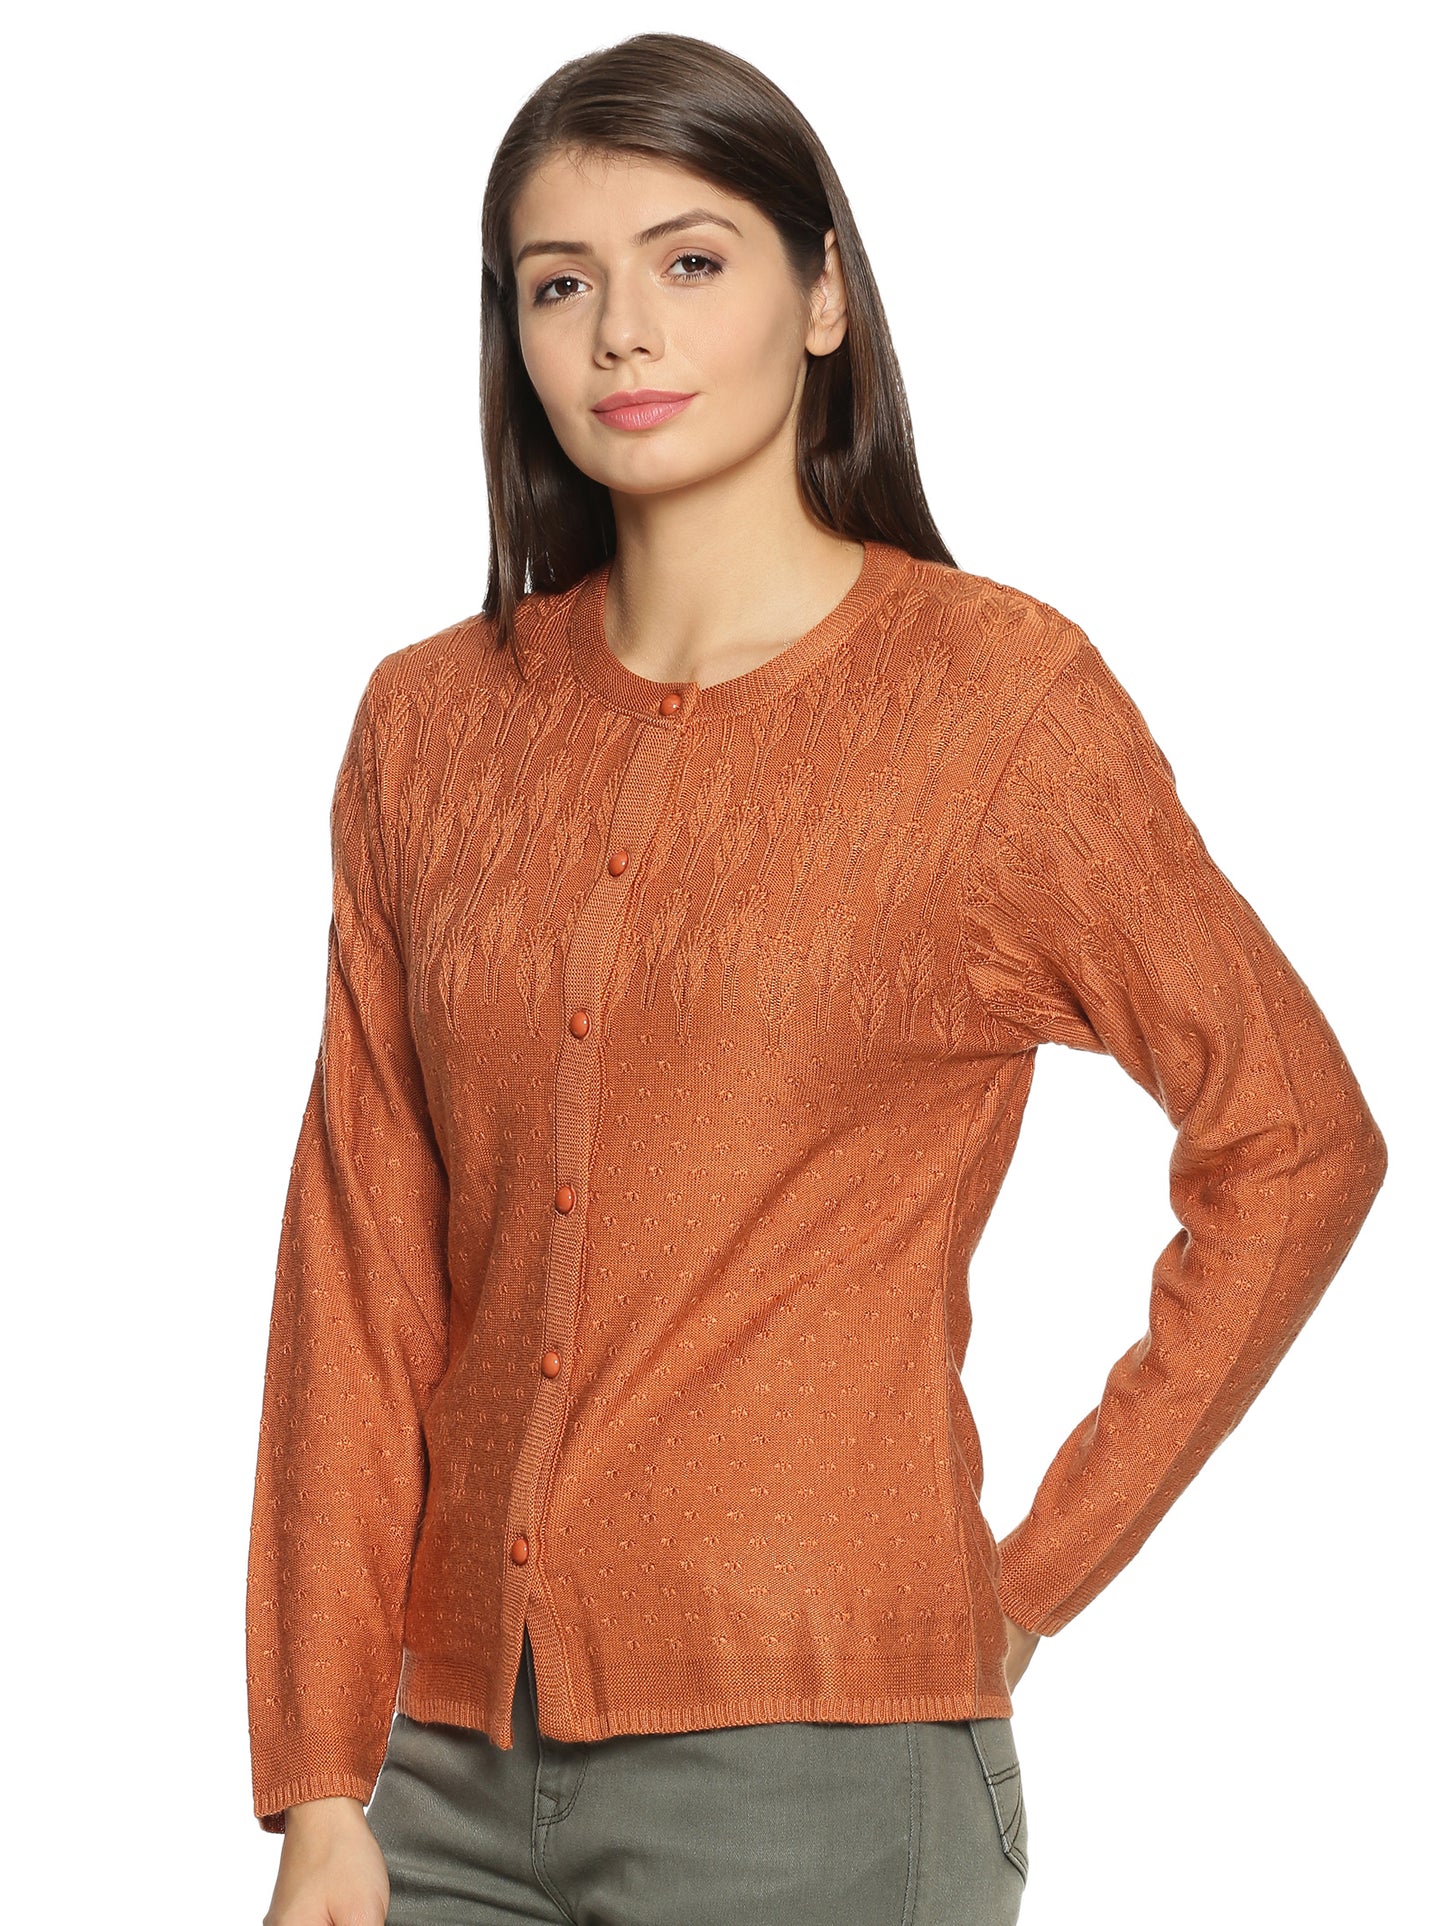 Clapton Acrylic Blend Round Neck Full Sleeve Casual Solid Winter Wear Cardigans For Women Orange